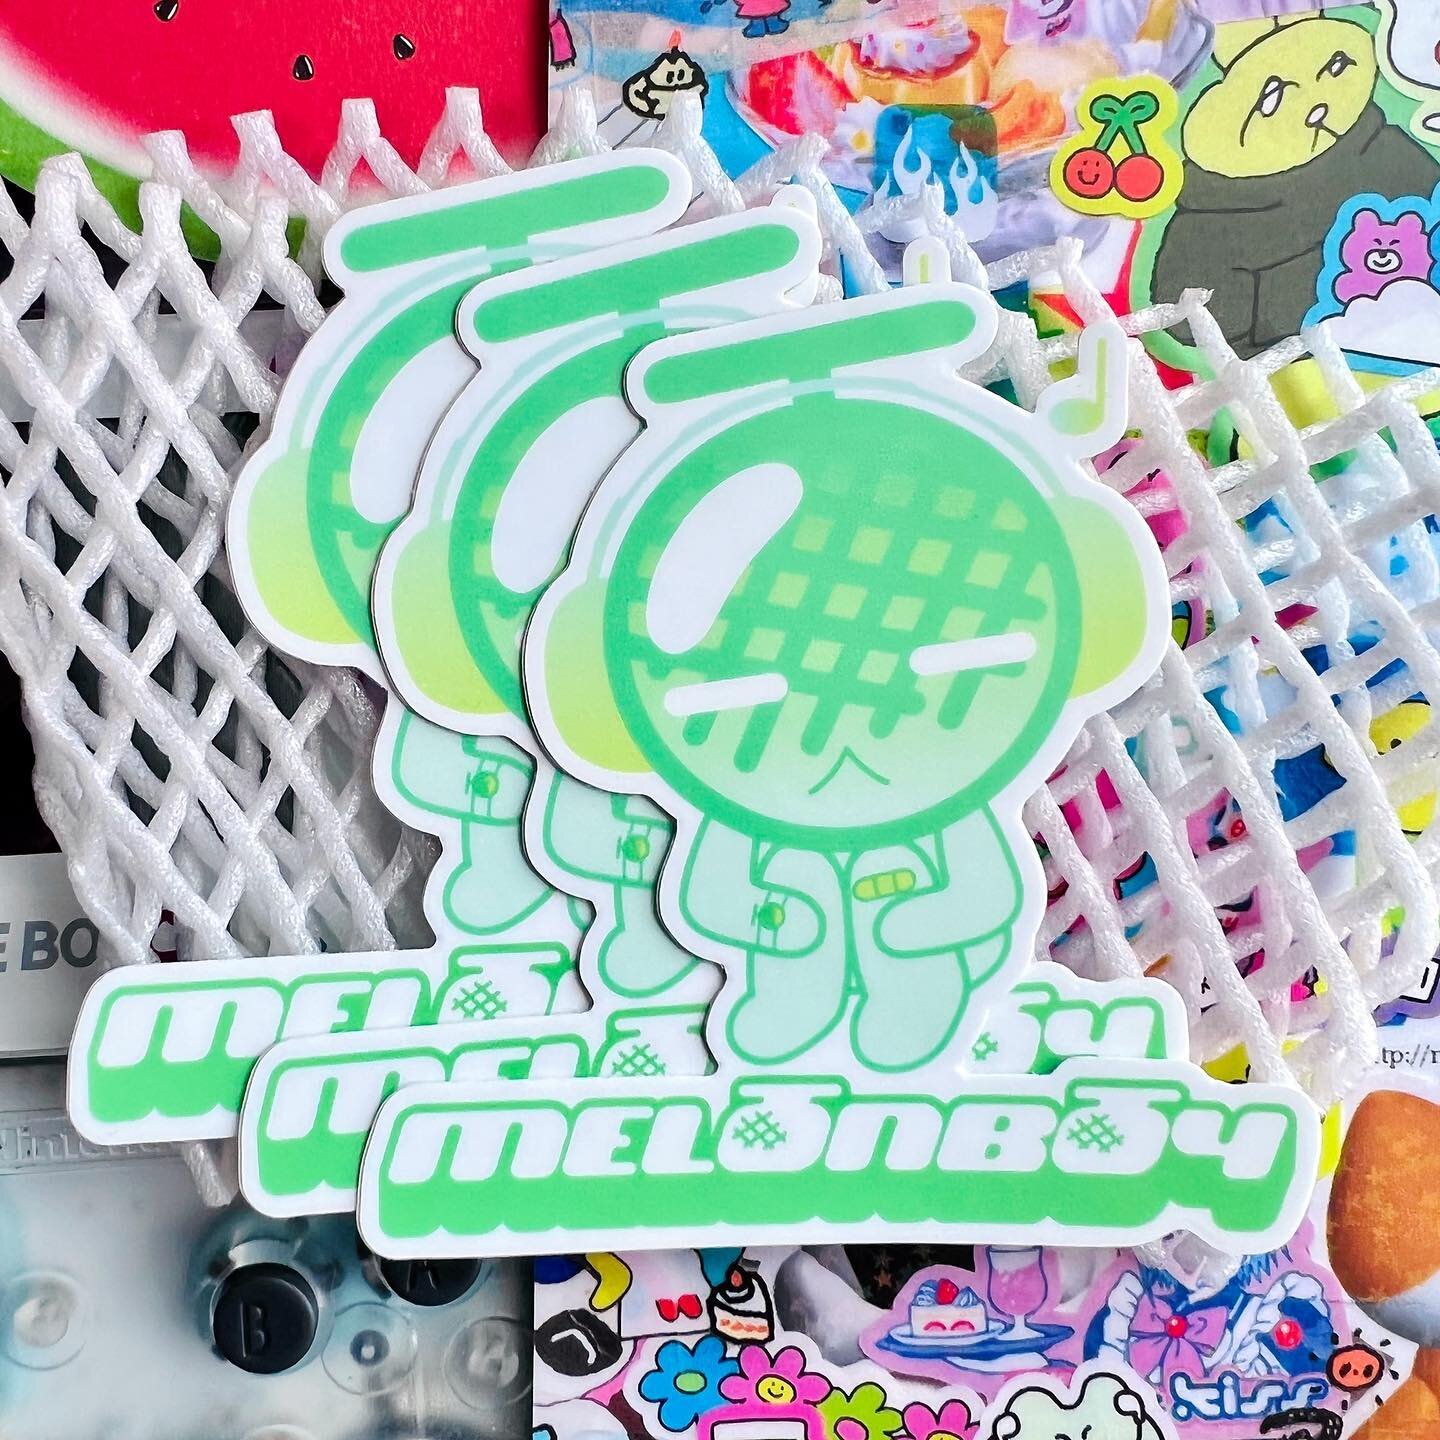 MELONBOY 🍈 STICKERS o(&mdash;_&mdash;)o

Literally got these because I got a coupon and I love my MELONBOY so much ✨ UP ON MY SHOP NOW ✨ 
🍈🍈🍈🍈🍈🍈🍈🍈🍈🍈🍈🍈